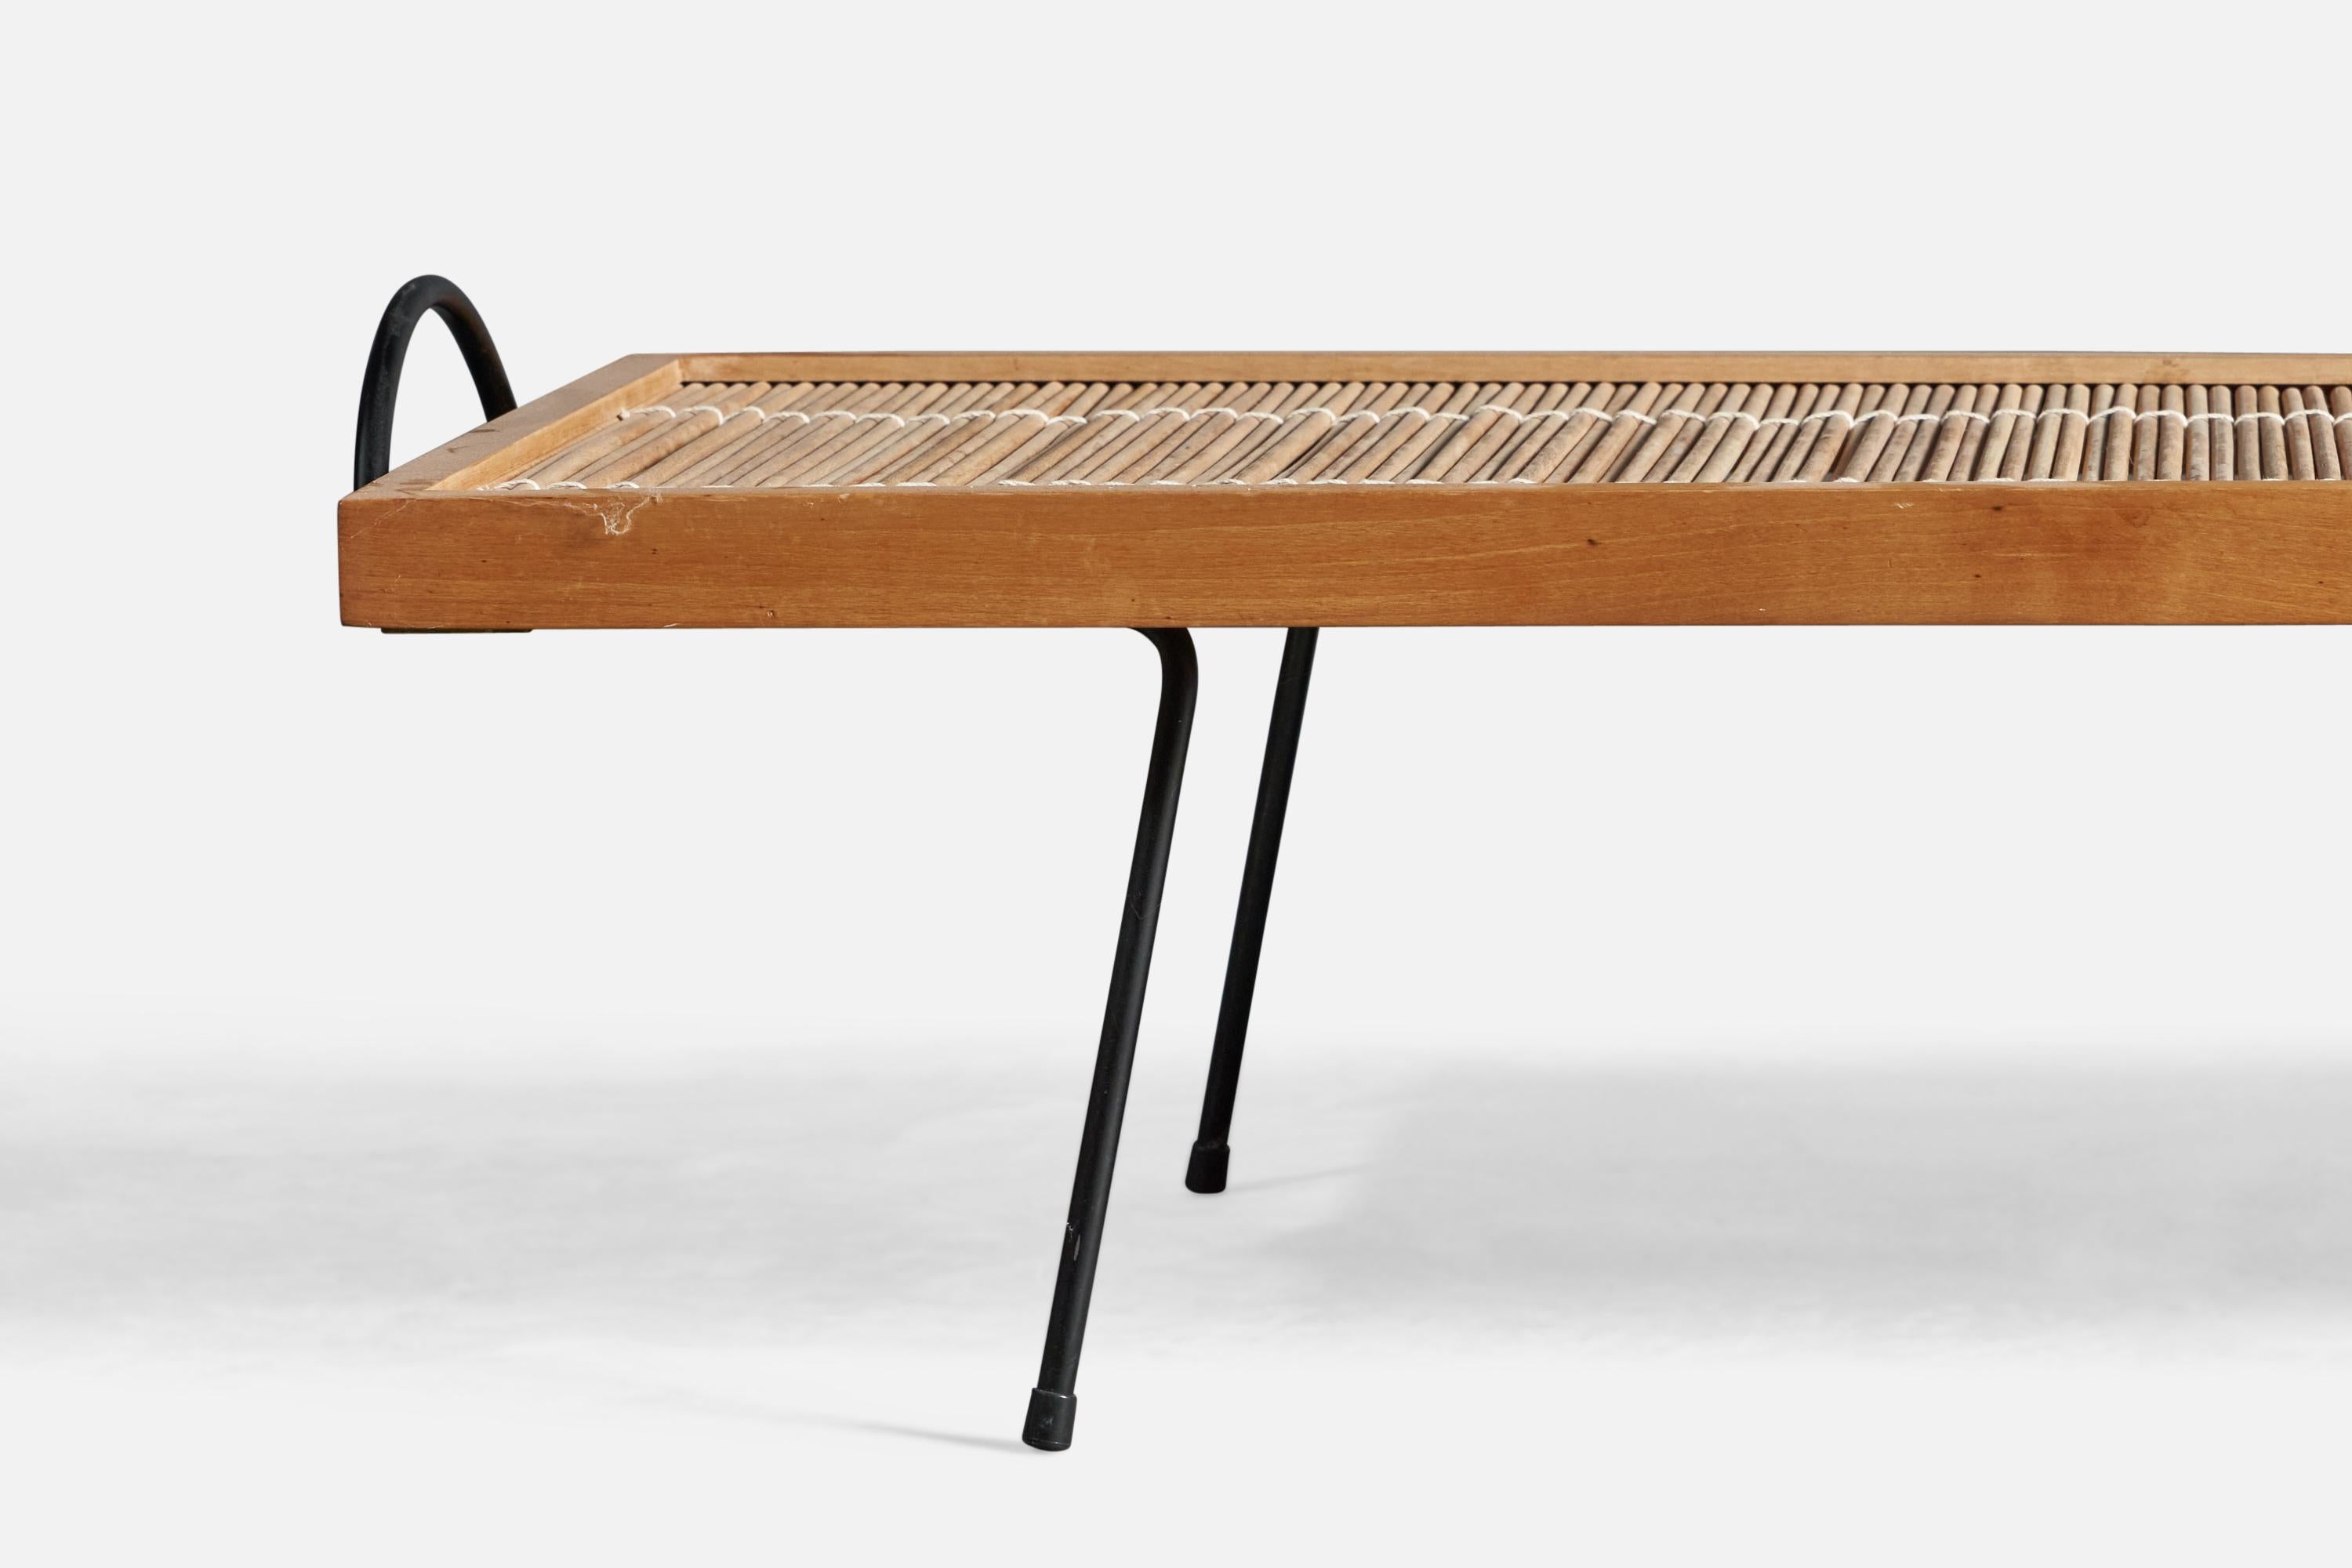 American Katavolos, Littell and Kelley, Bench, Metal, Wood, Reed, USA, 1950s For Sale